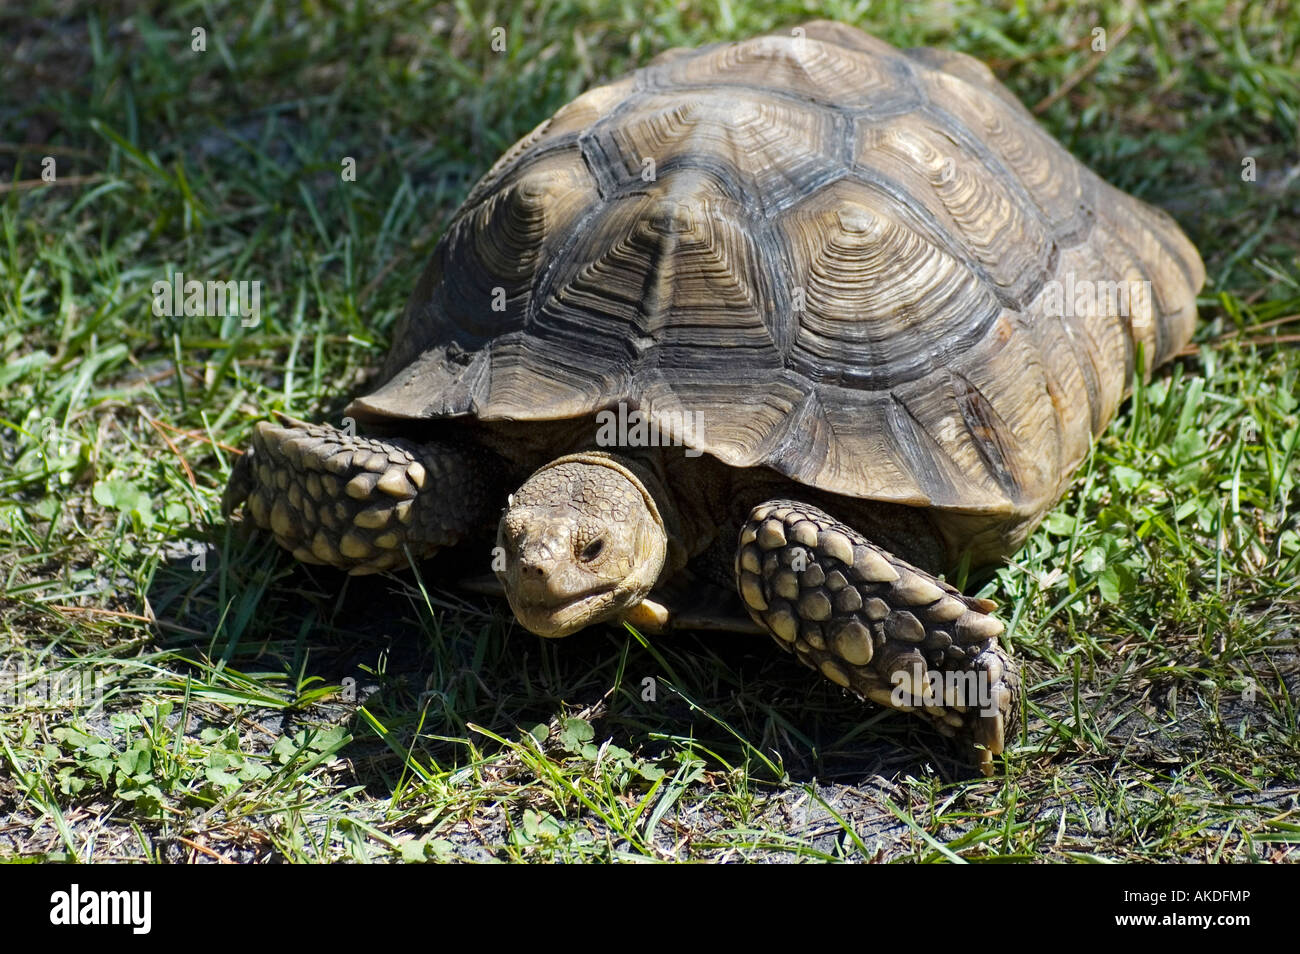 African Spur Thigh Tortoise on display at Festival Lake City Florida Stock Photo